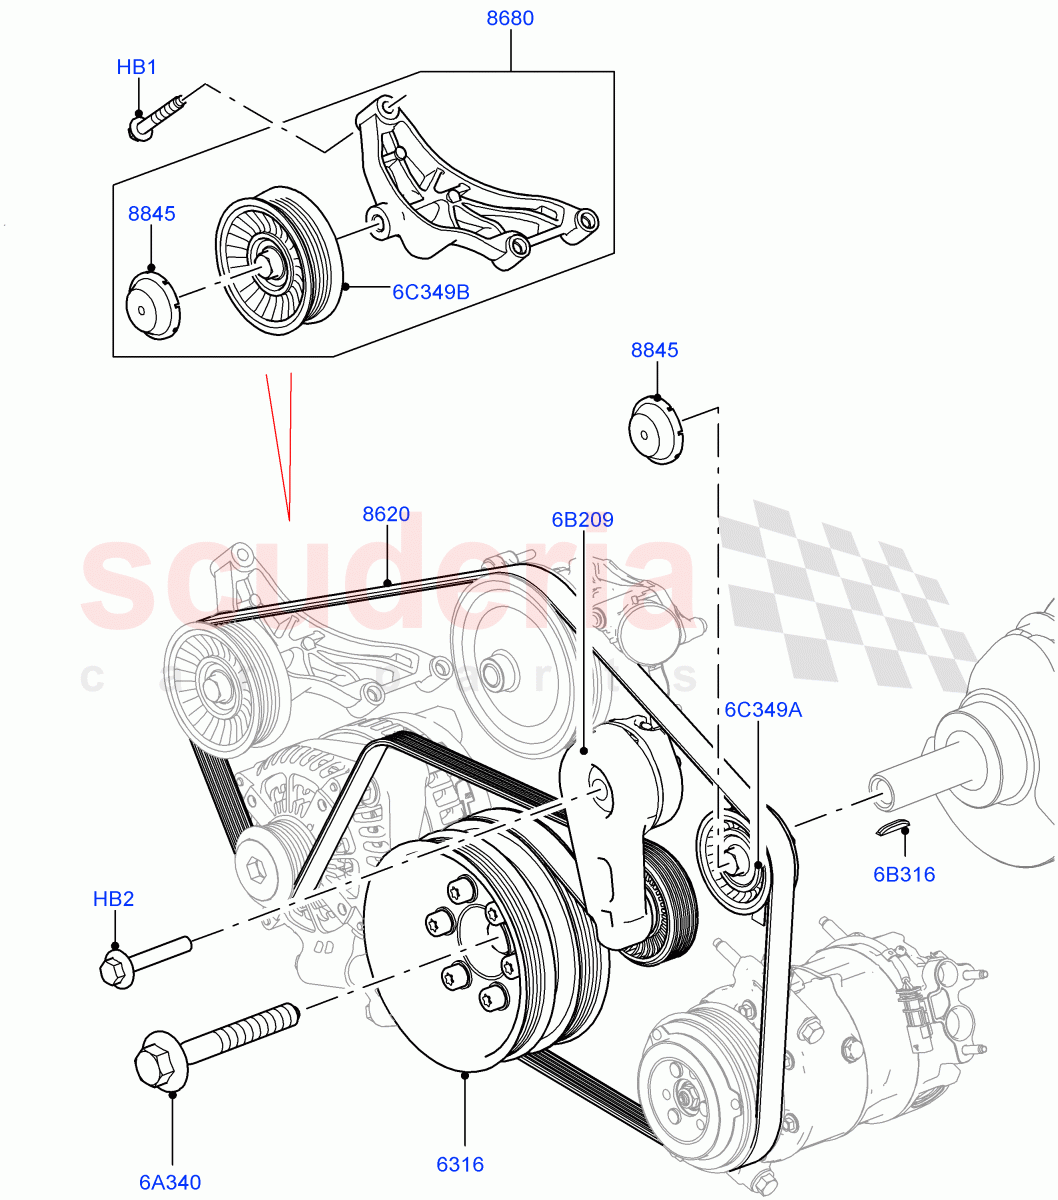 Pulleys And Drive Belts(Primary Drive)(3.0L DOHC GDI SC V6 PETROL) of Land Rover Land Rover Range Rover Velar (2017+) [3.0 DOHC GDI SC V6 Petrol]